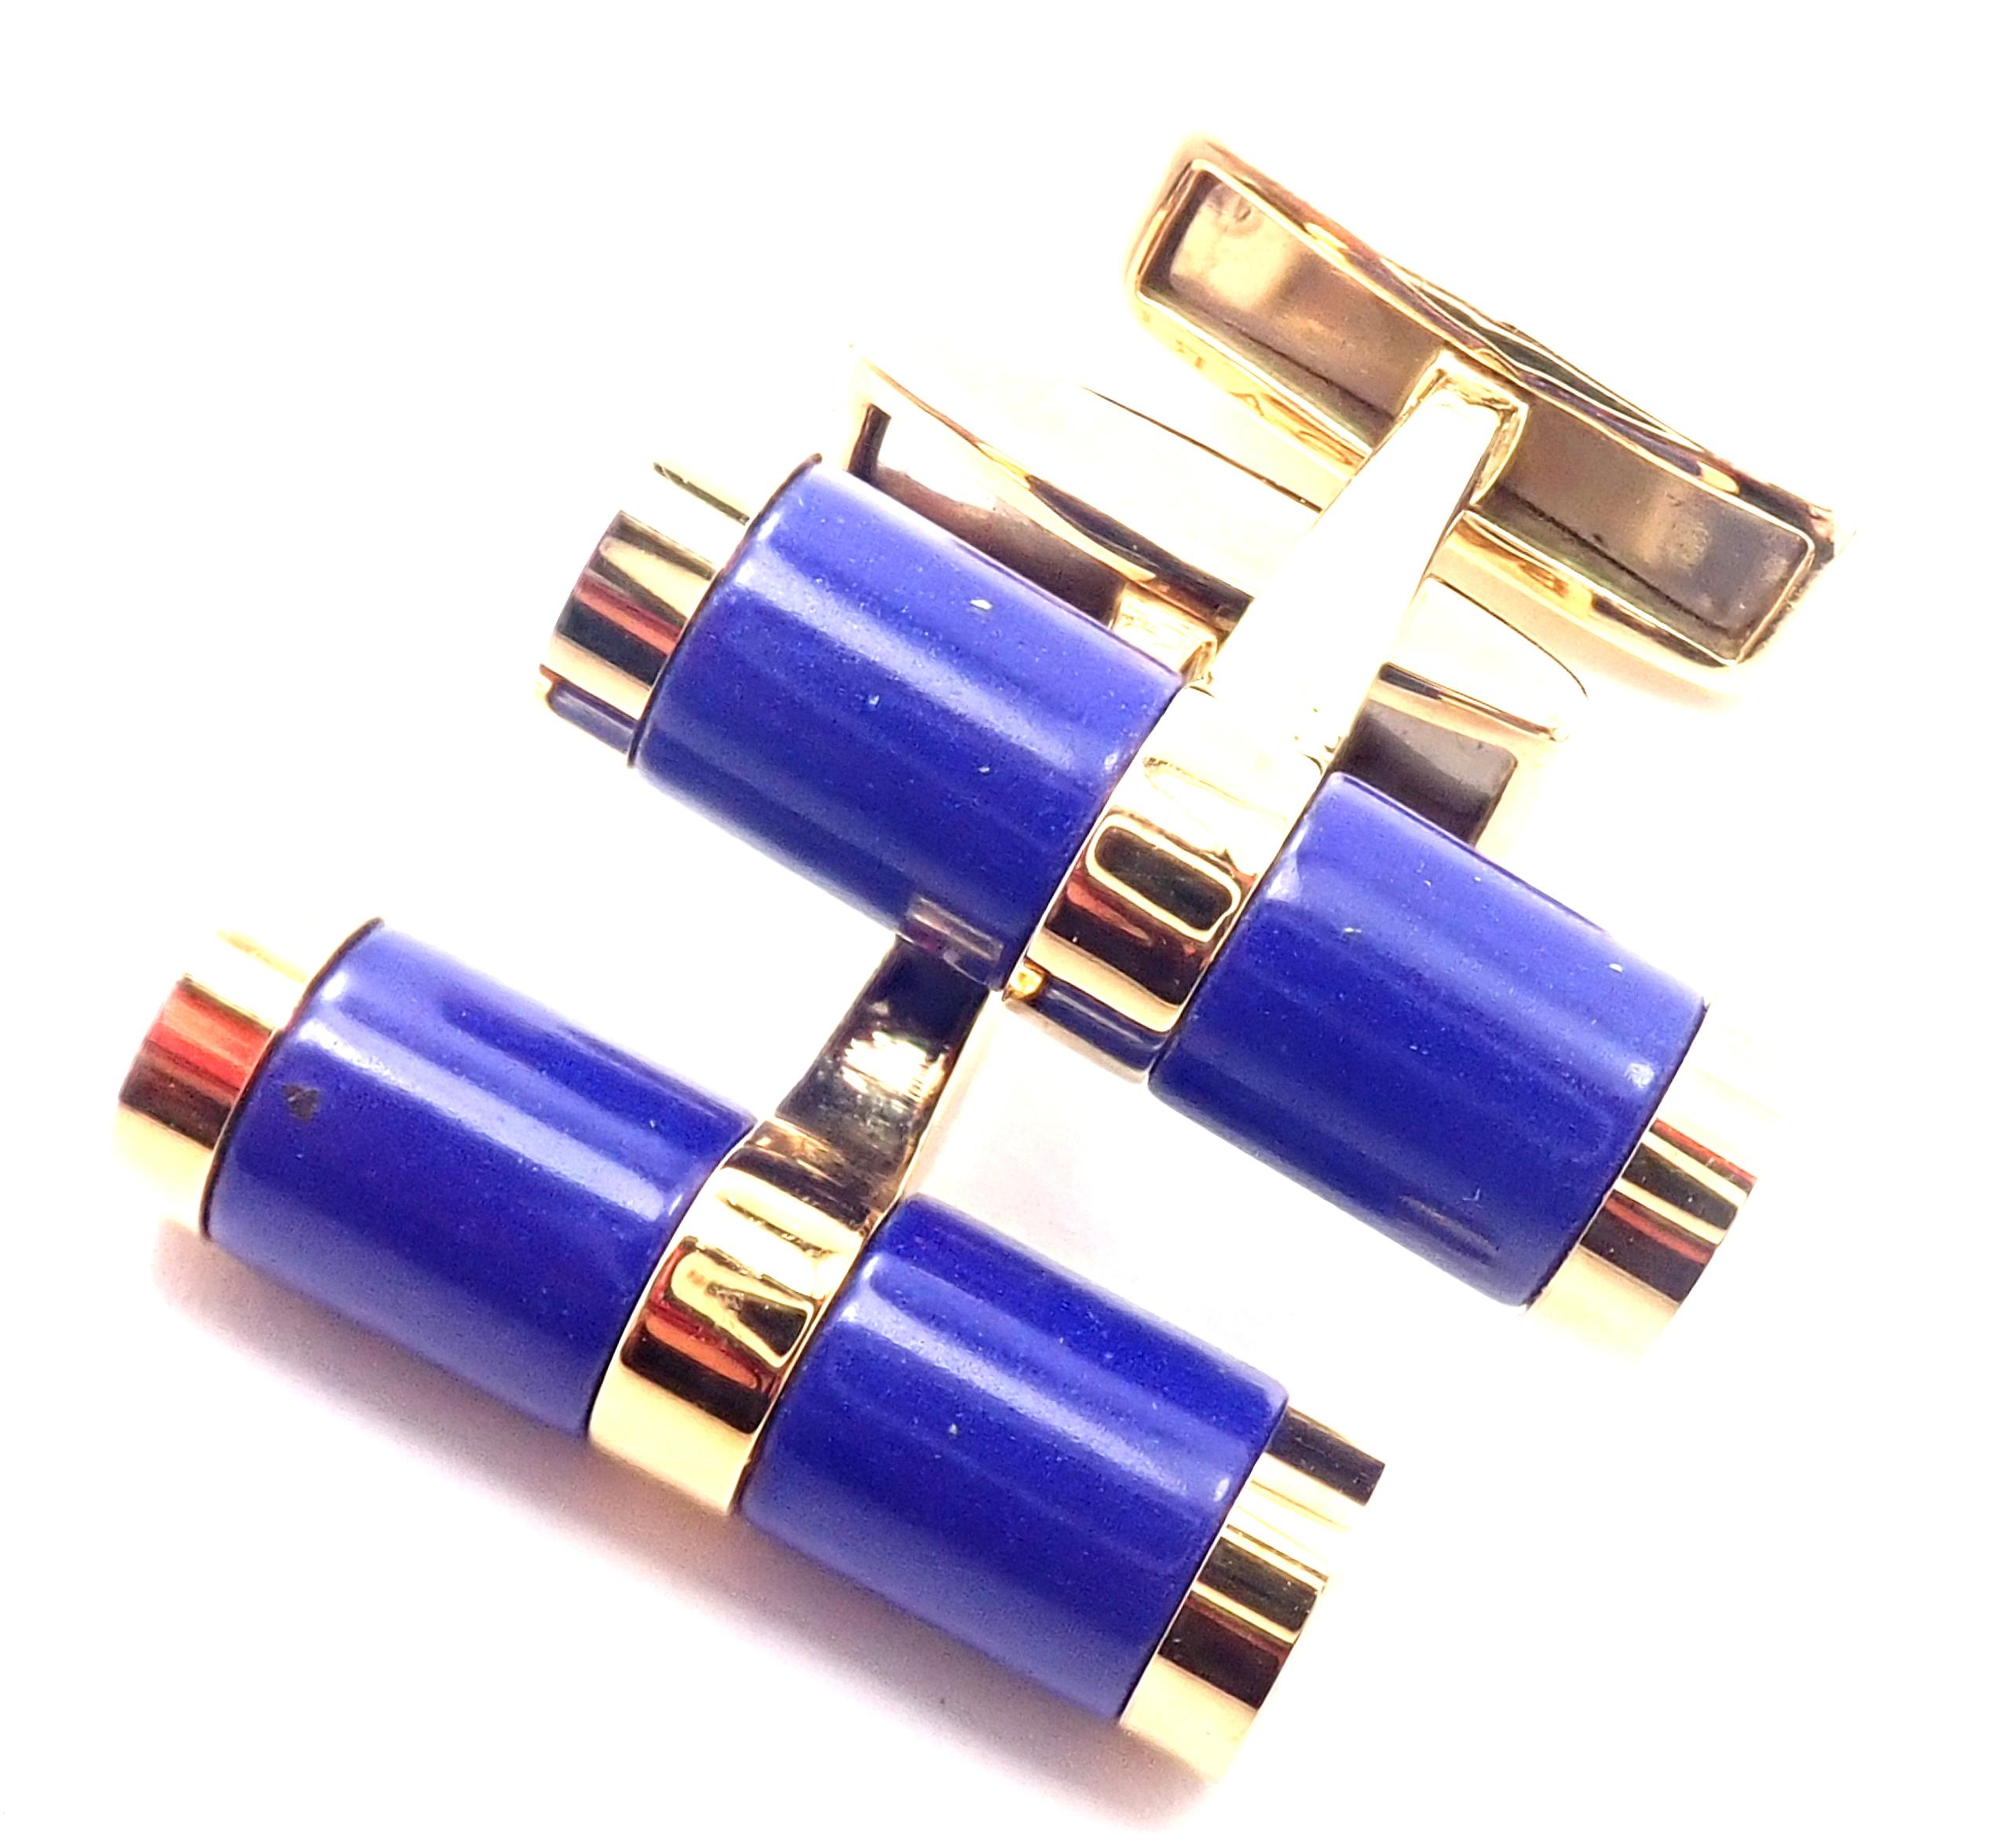 18k Yellow Gold Lapis Lazuli Cufflinks by Bulgari. 
With Lapis Lazuli stones. 
Details: 
Measurements: 21mm x 22mm x 15mm
Weight: 14.8 grams
Stamped Hallmarks: Bvlgari 750 Italy
*Free Shipping within the United States*
YOUR PRICE: $2,900
T2855mtdd